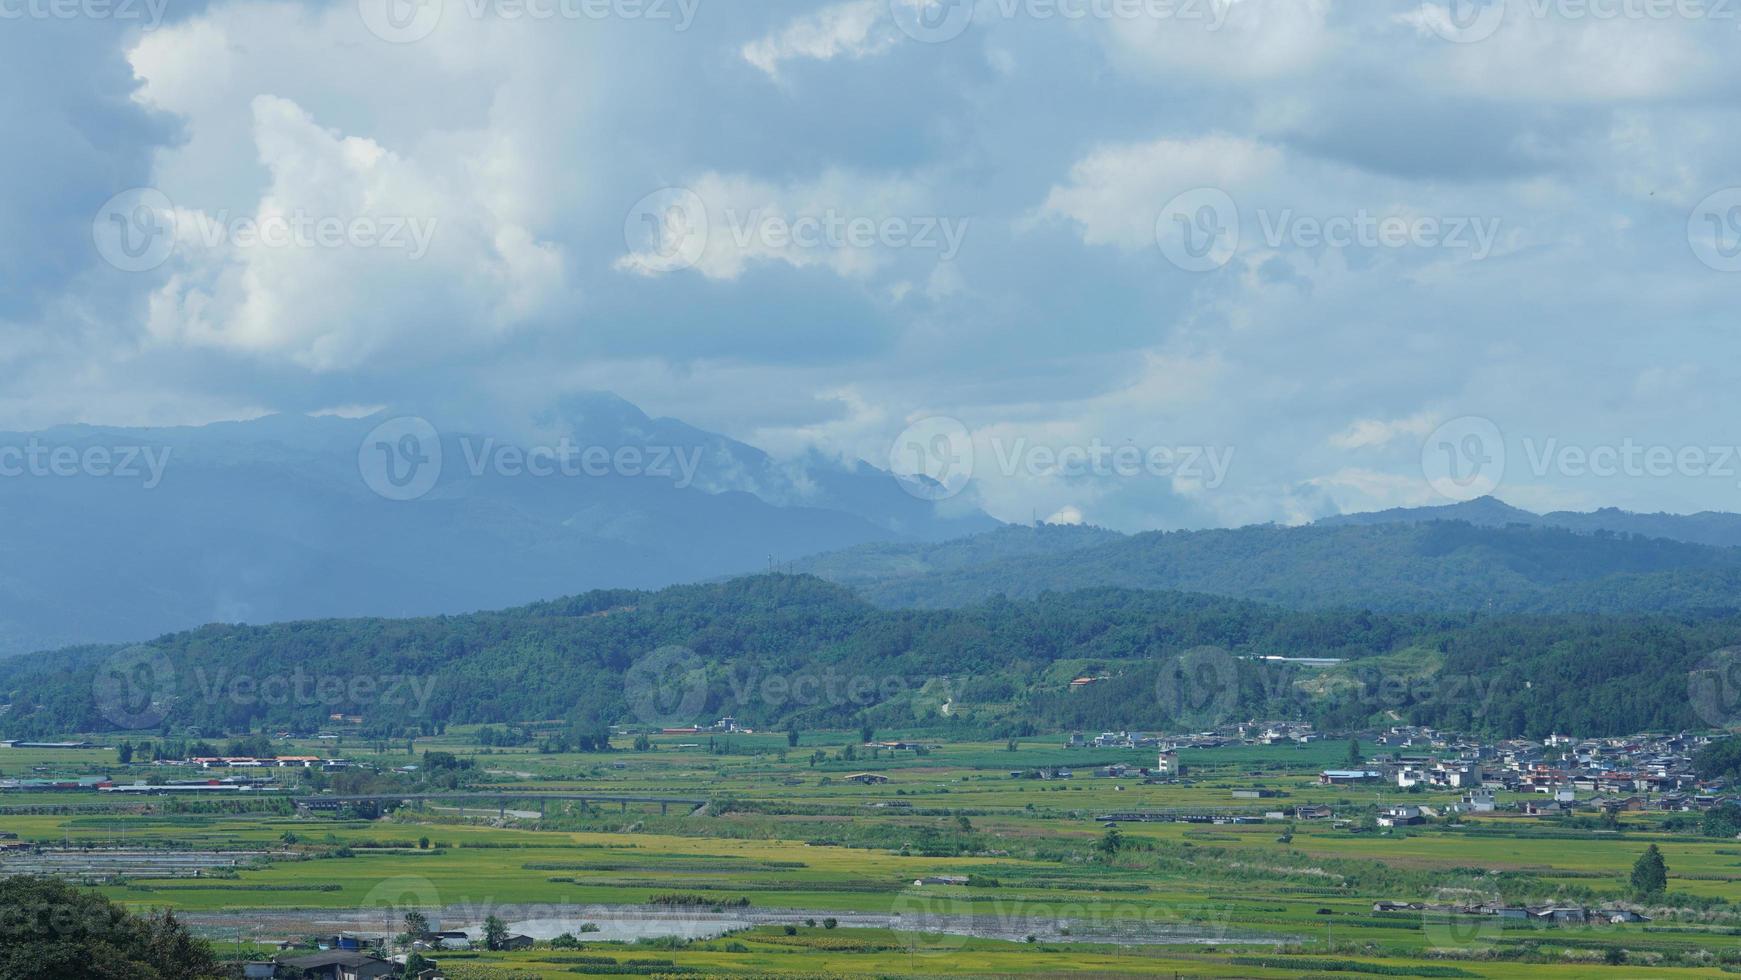 The harvesting yellow rice field view located in the valley among the mountains with the cloudy sky as background photo